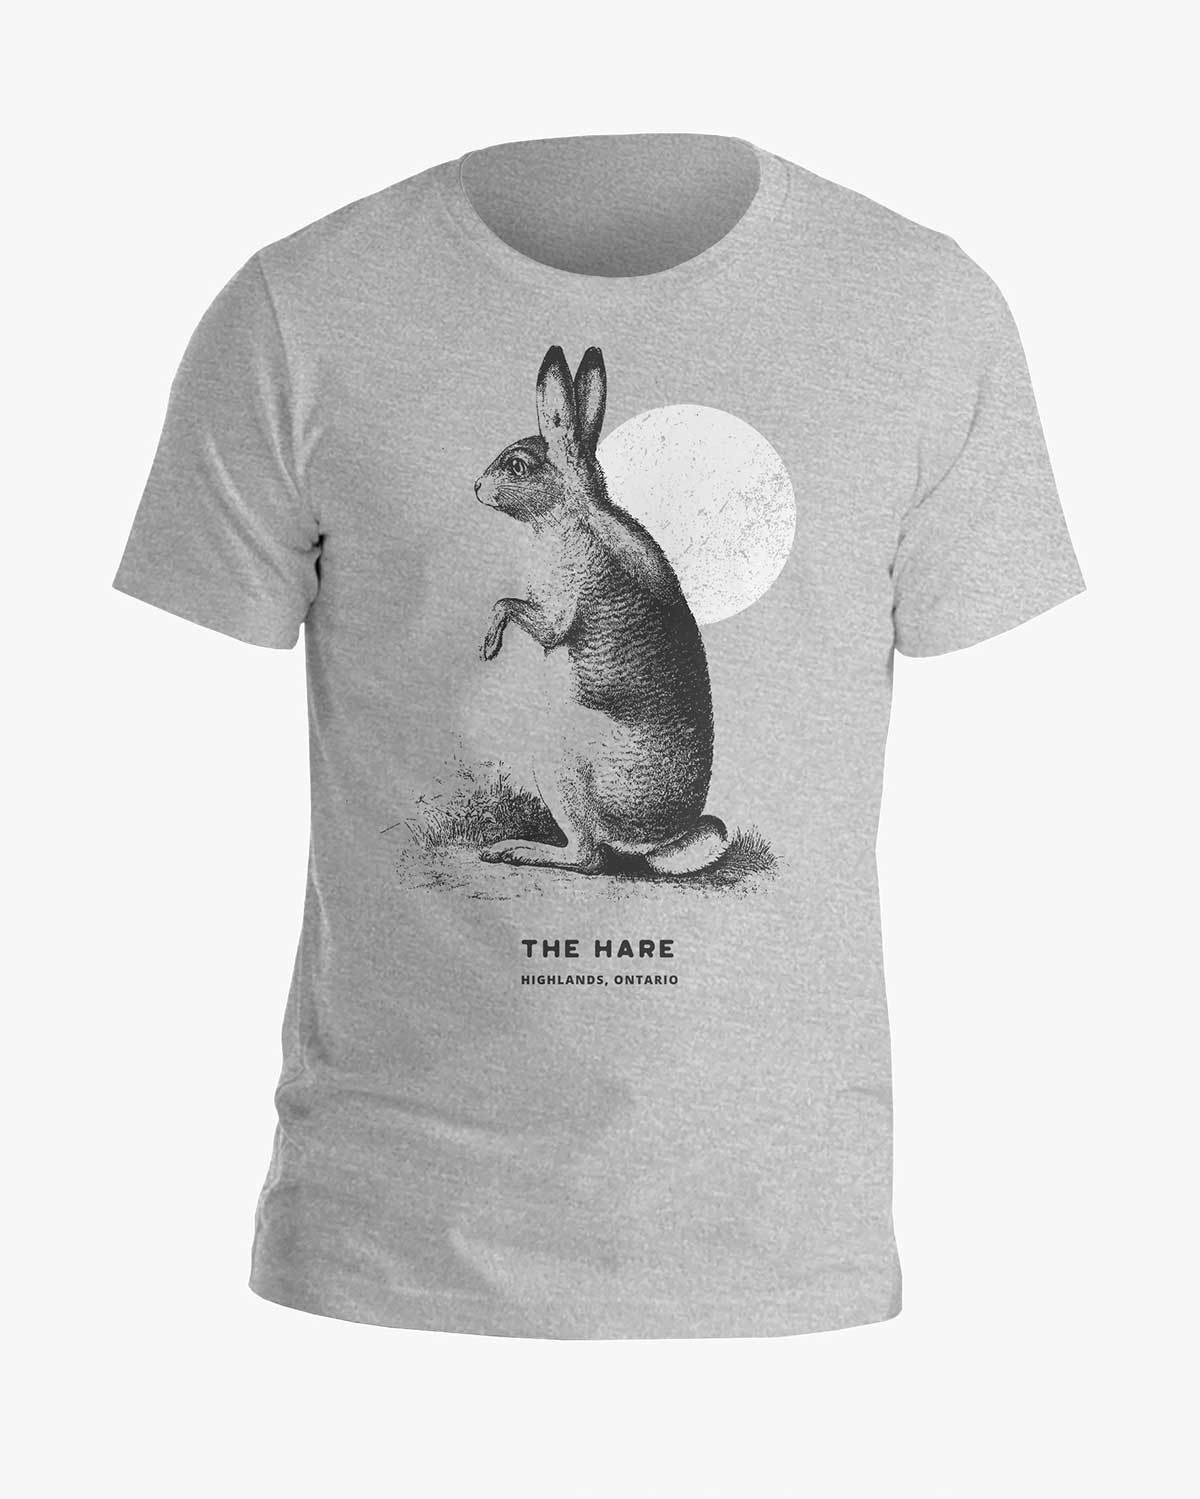 The Hare - Highlands - Tee